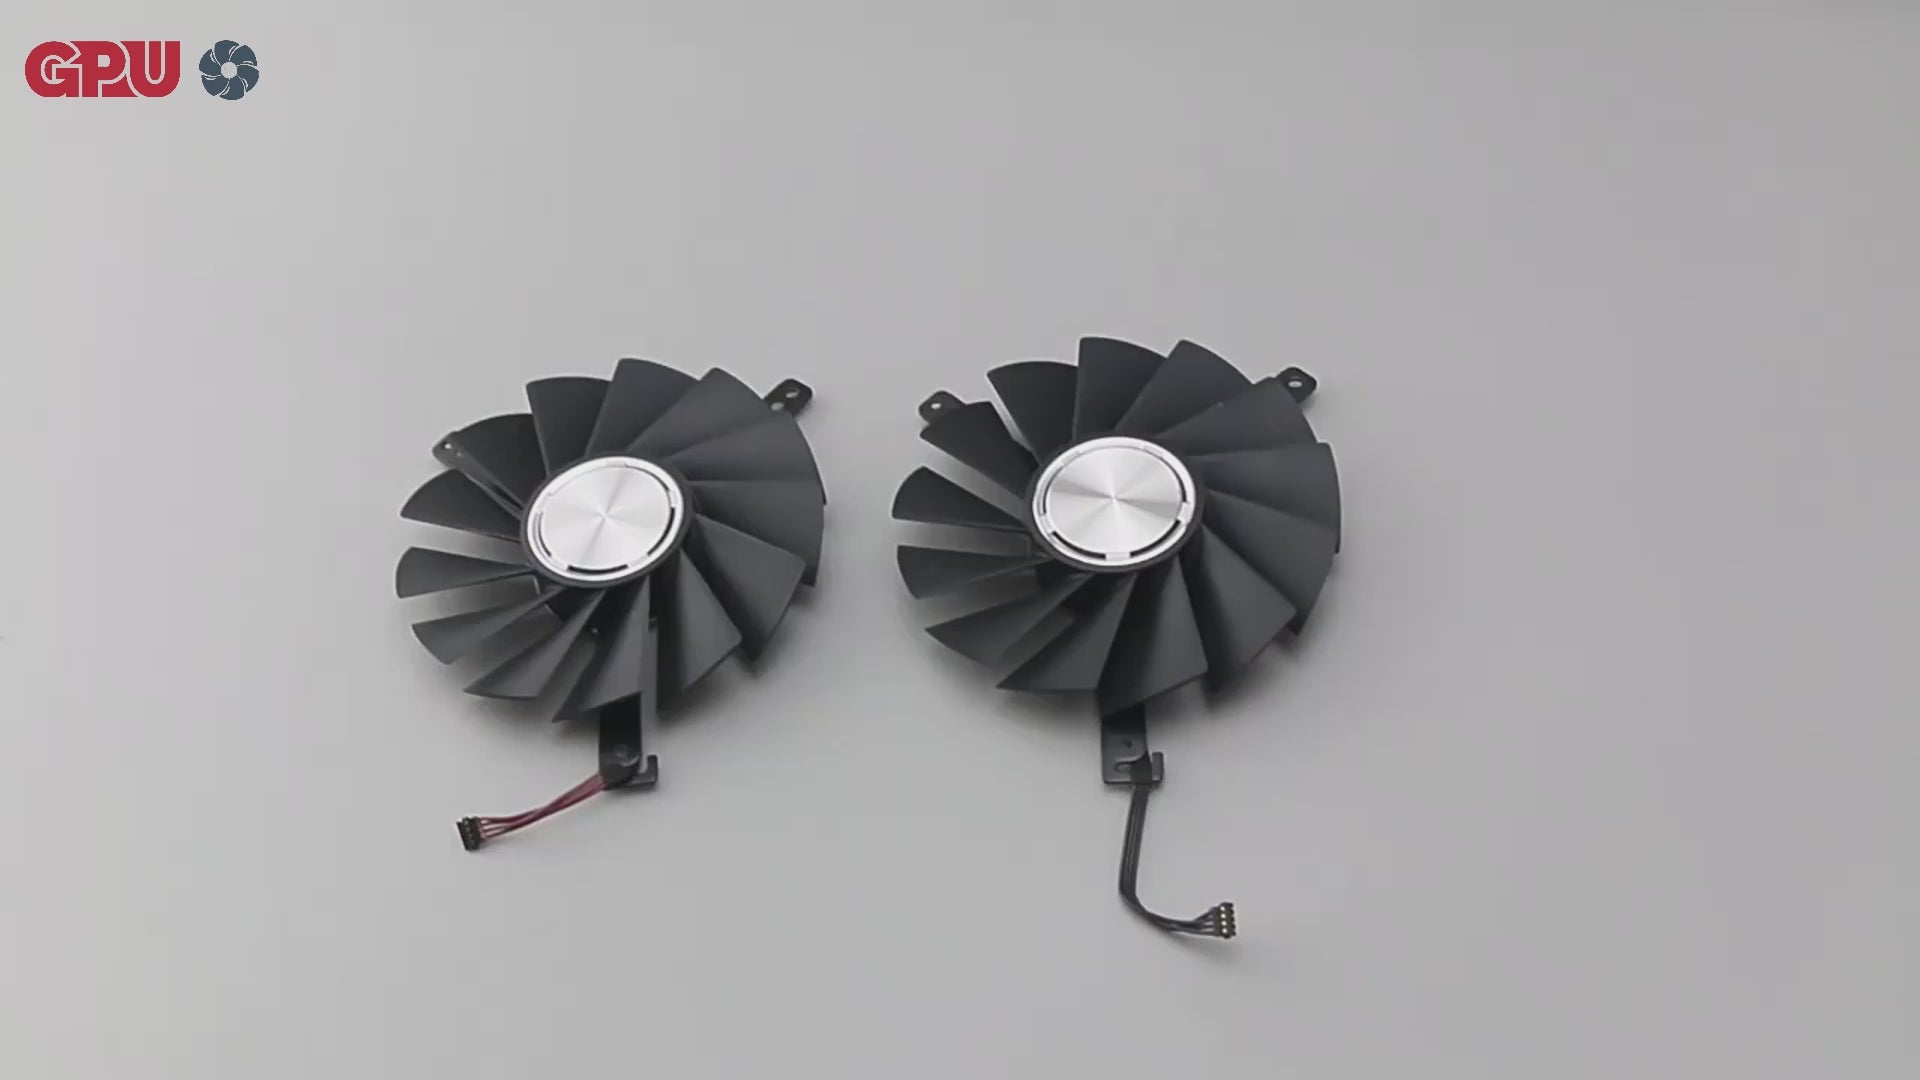 NVIDIA GeForce RTX 2070 Super Founders Edition Fan Replacement